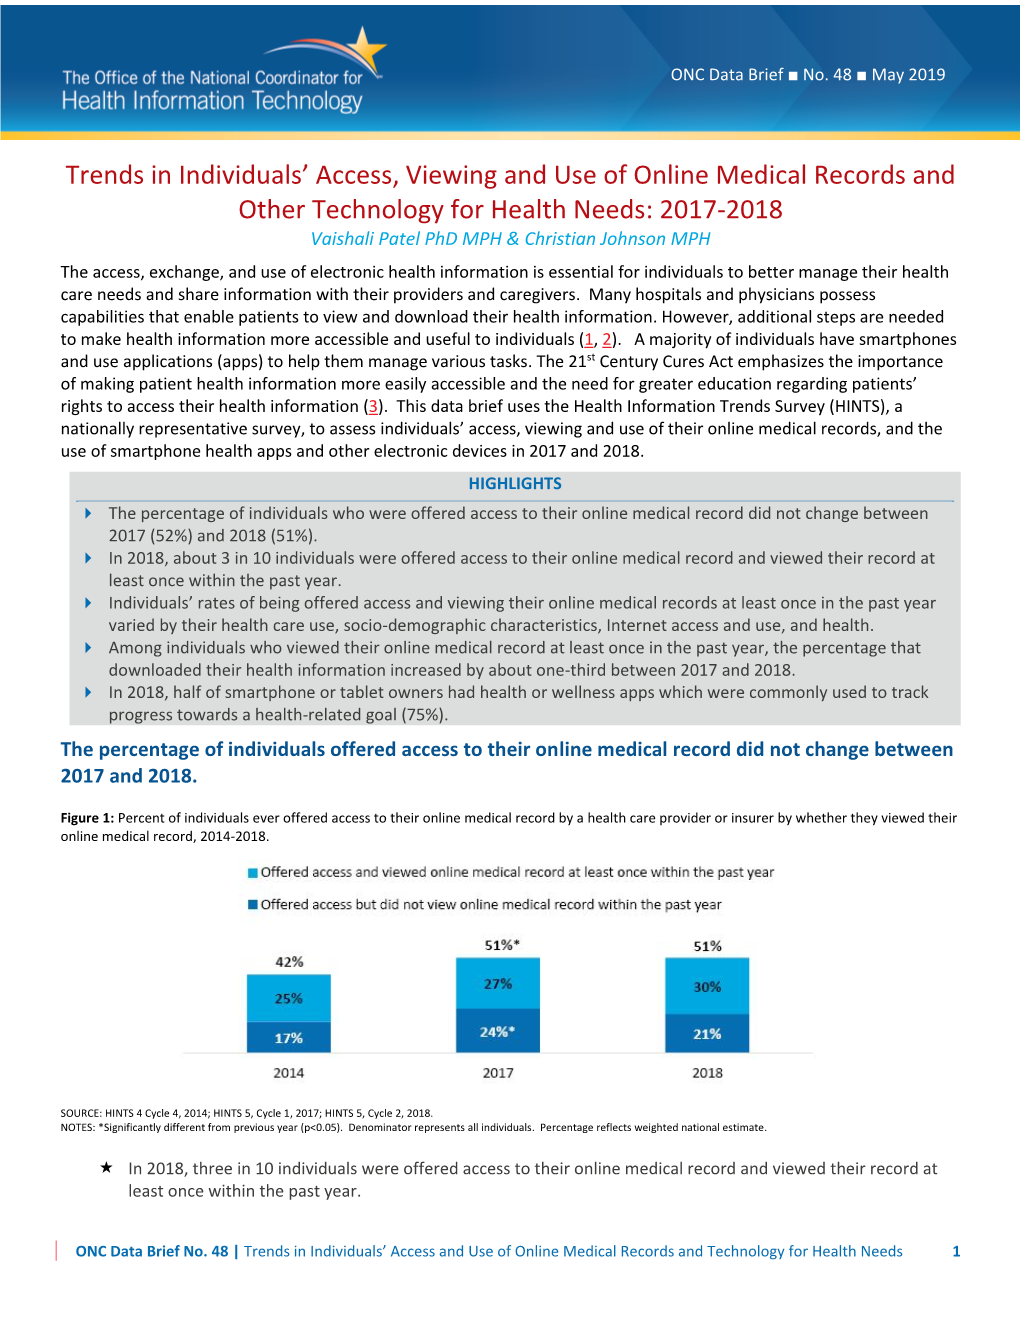 Trends in Individuals' Access, Viewing and Use of Online Medical Records and Other Technology for Health Needs: 2017-2018